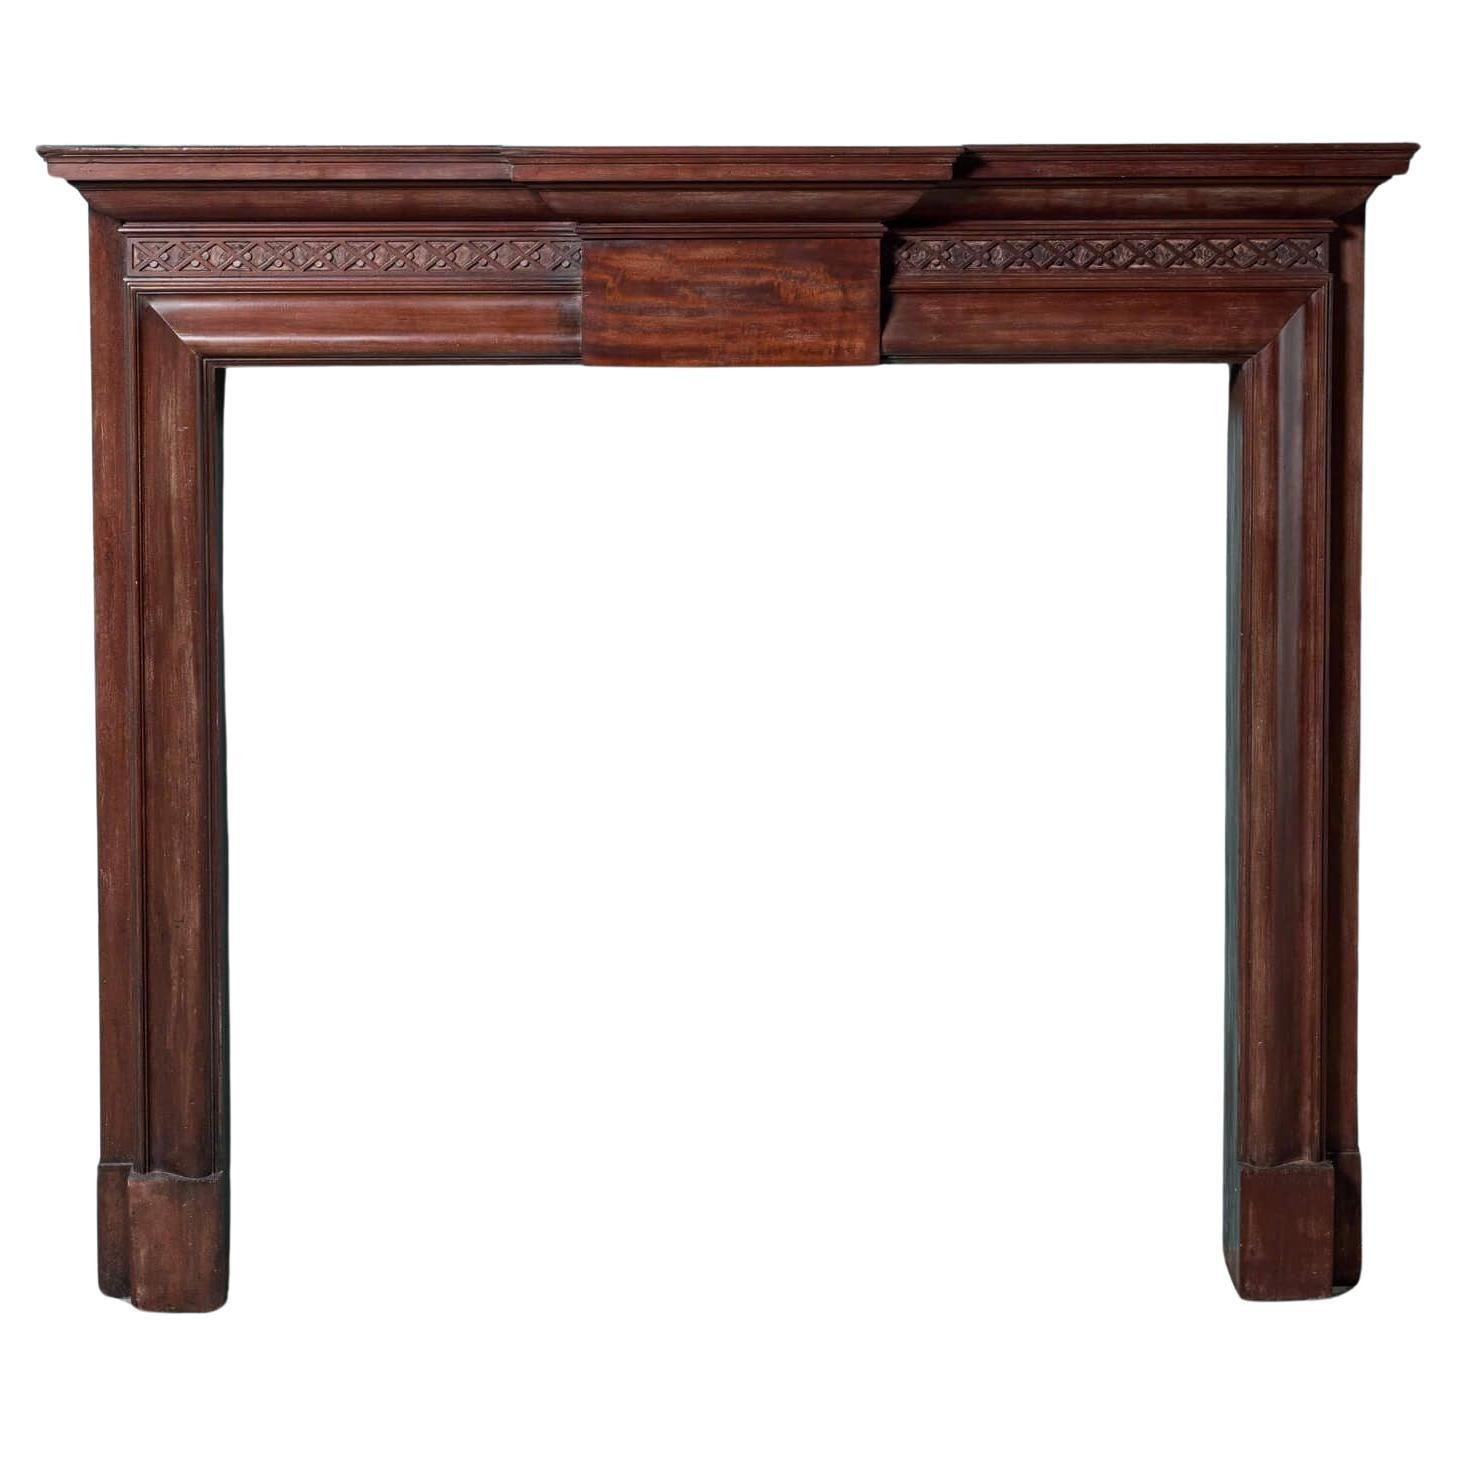 Antique English Mahogany Fireplace For Sale